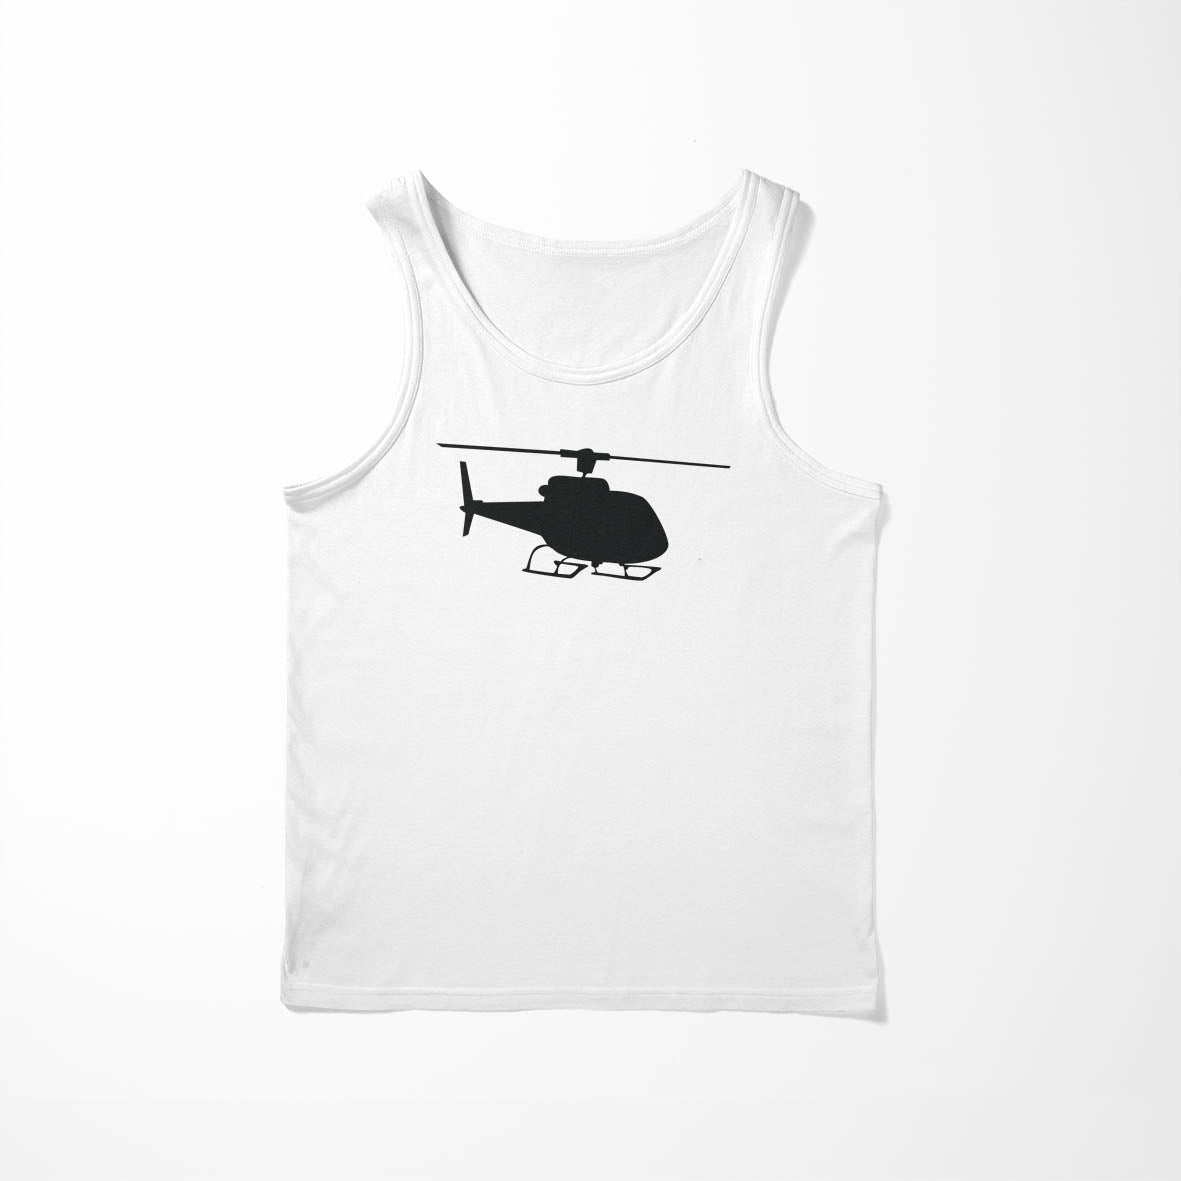 Helicopter Silhouette Designed Tank Tops